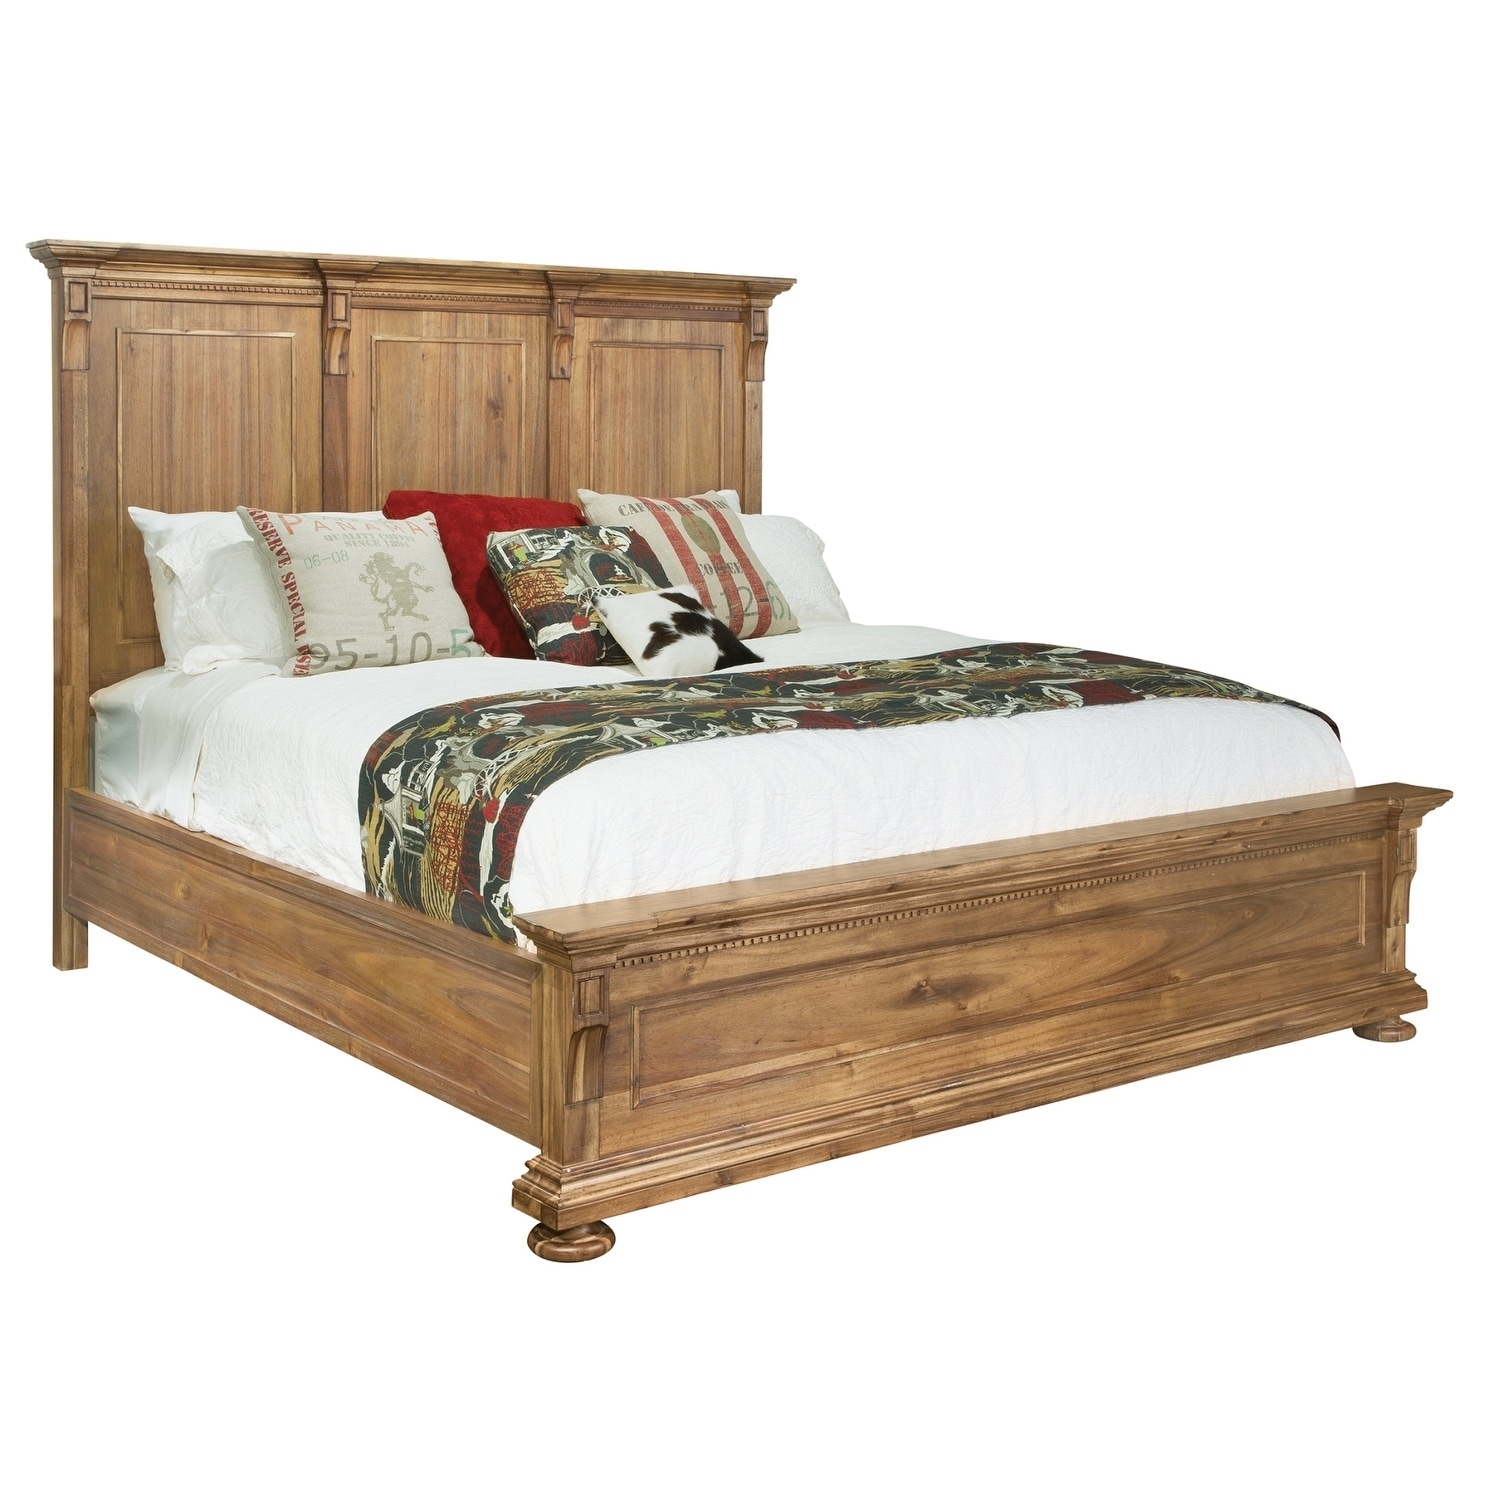 Hekman Furniture Wellington Hall Contemporary, Solid Wood Finished, Queen Bed Frame with Headboard & Footboard, Cama